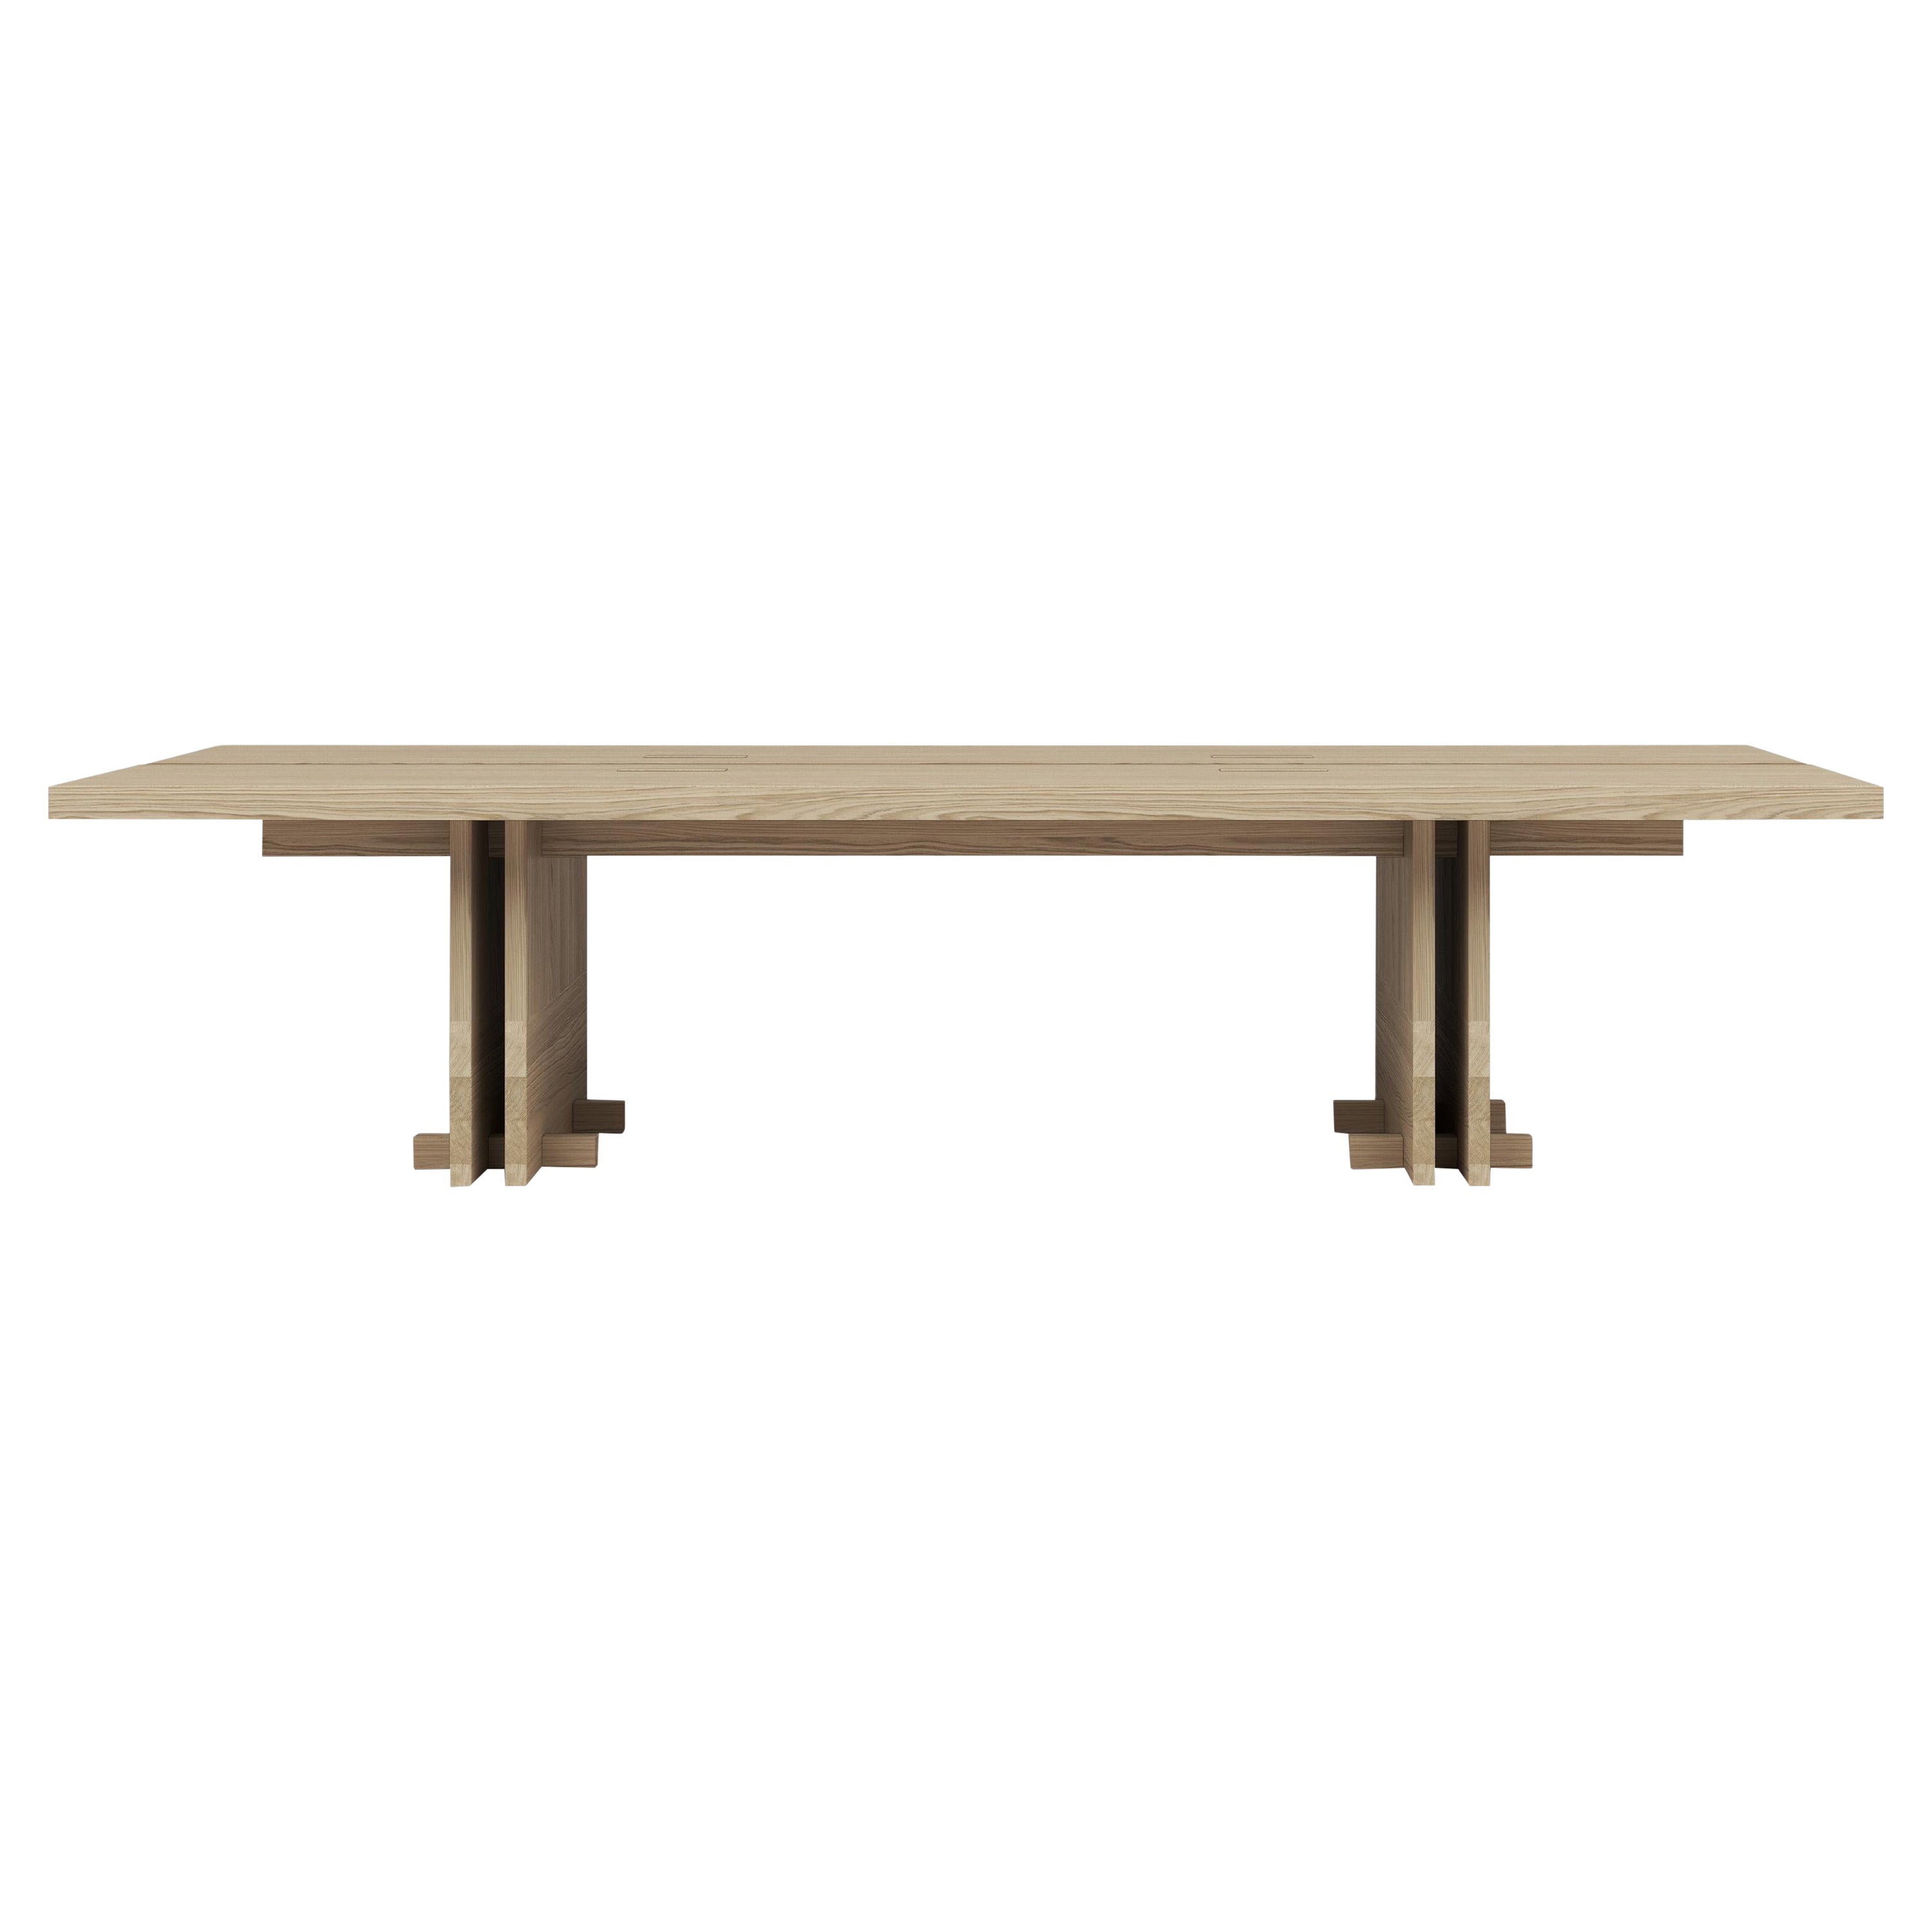 Rift Wood Grain Dining Table by Andy Kerstens For Sale